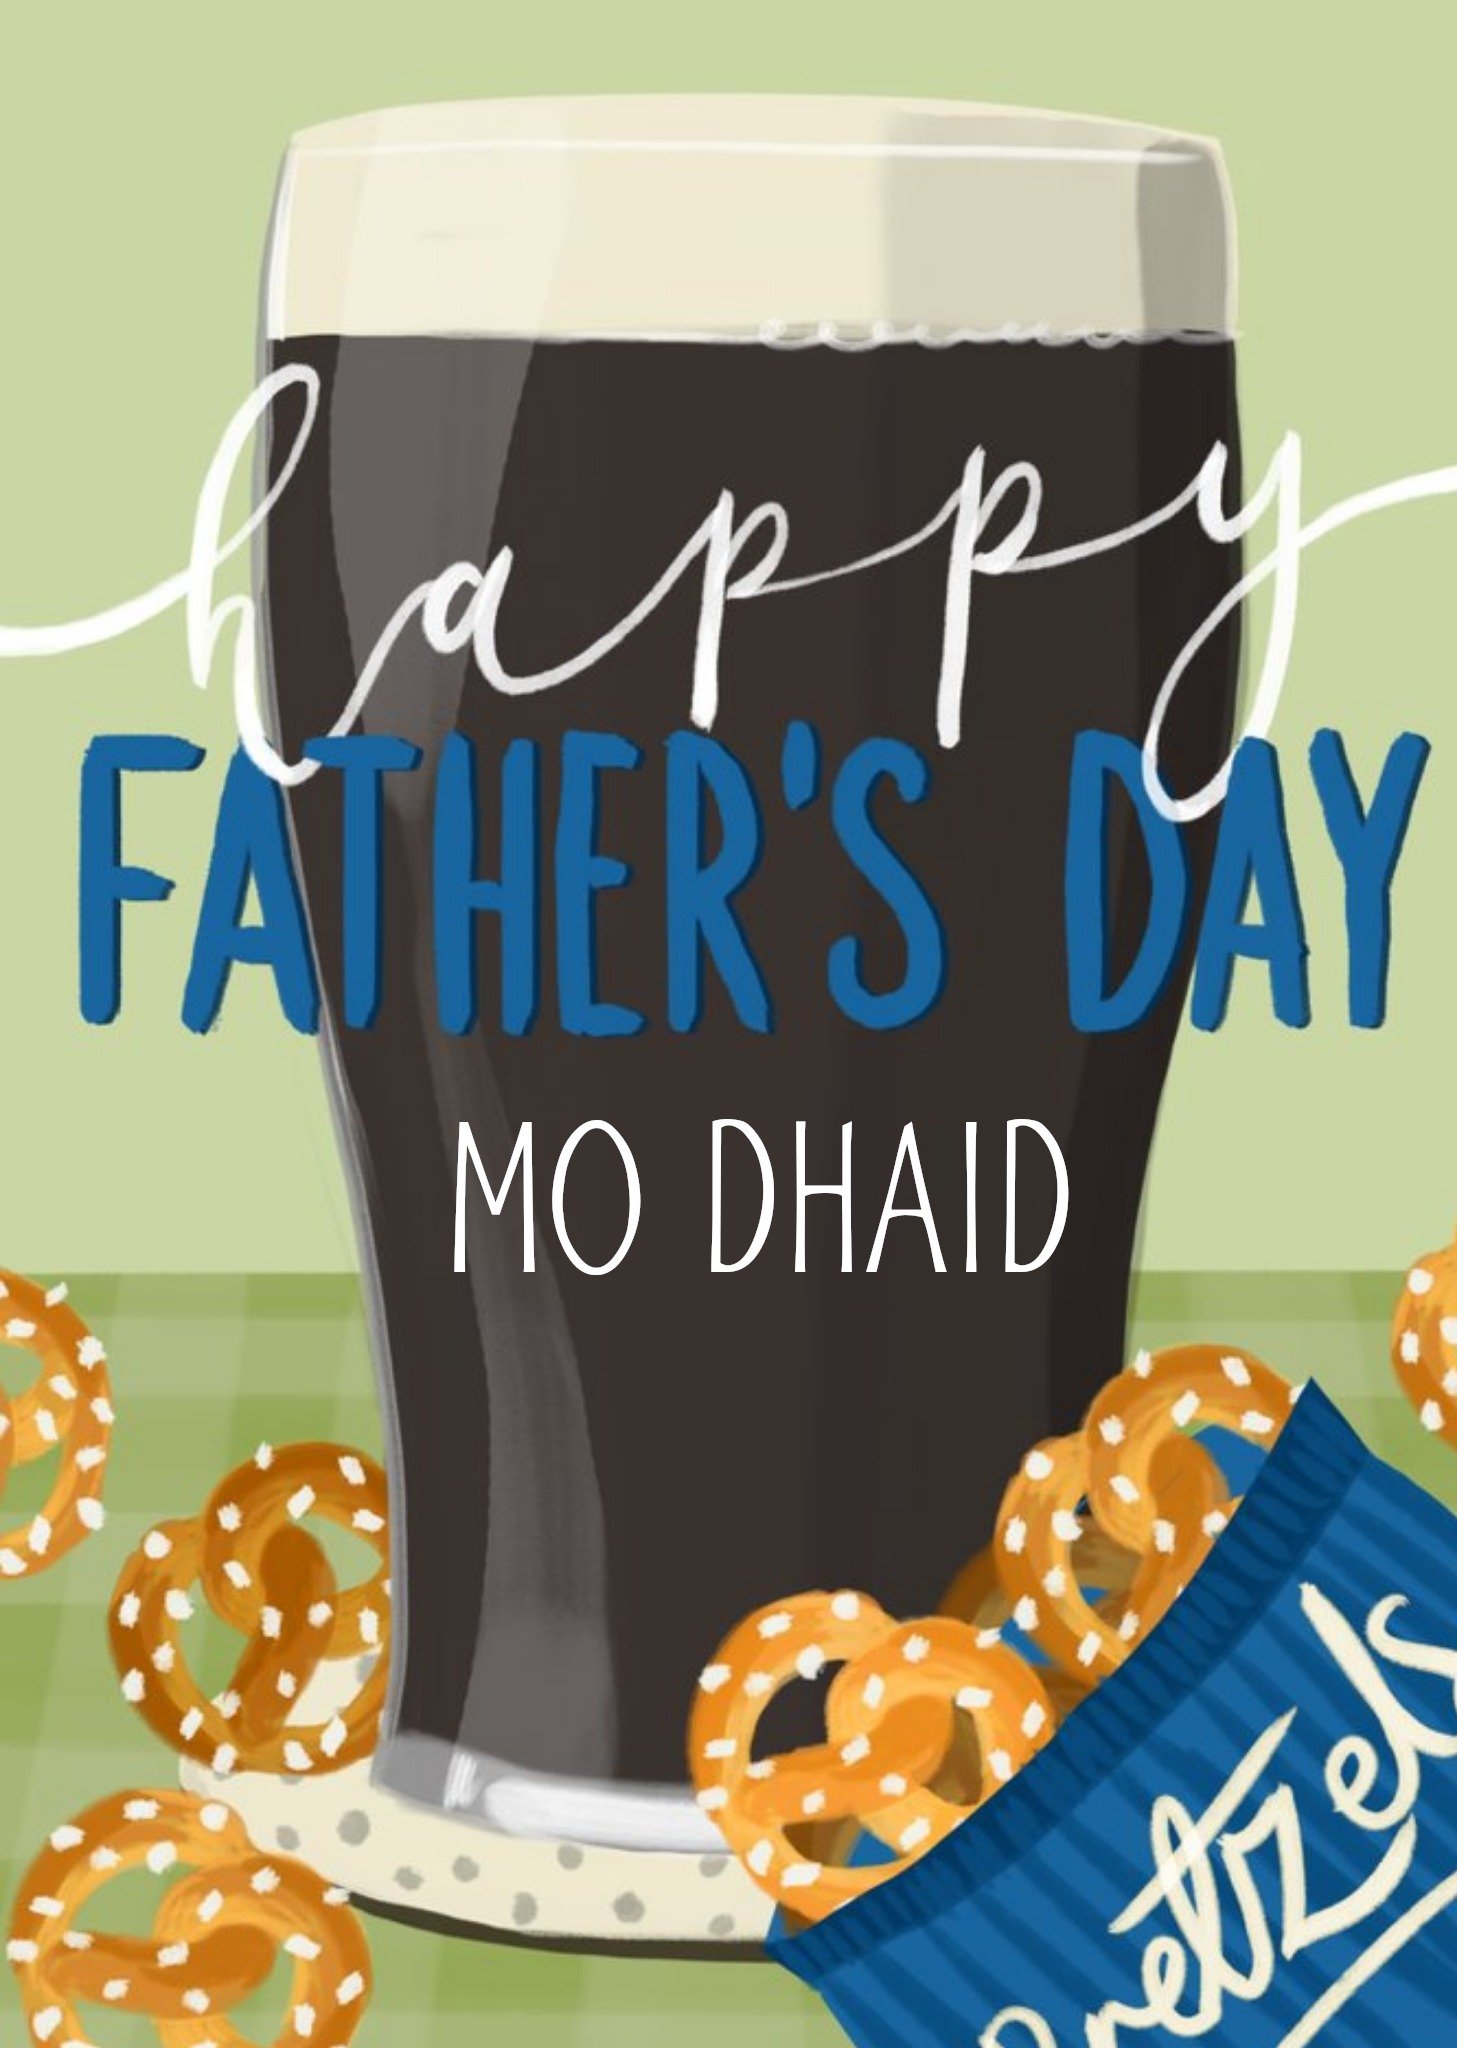 Moonpig Okey Dokey Design Illustrated Beer And Pretzels Father's Day Card Ecard